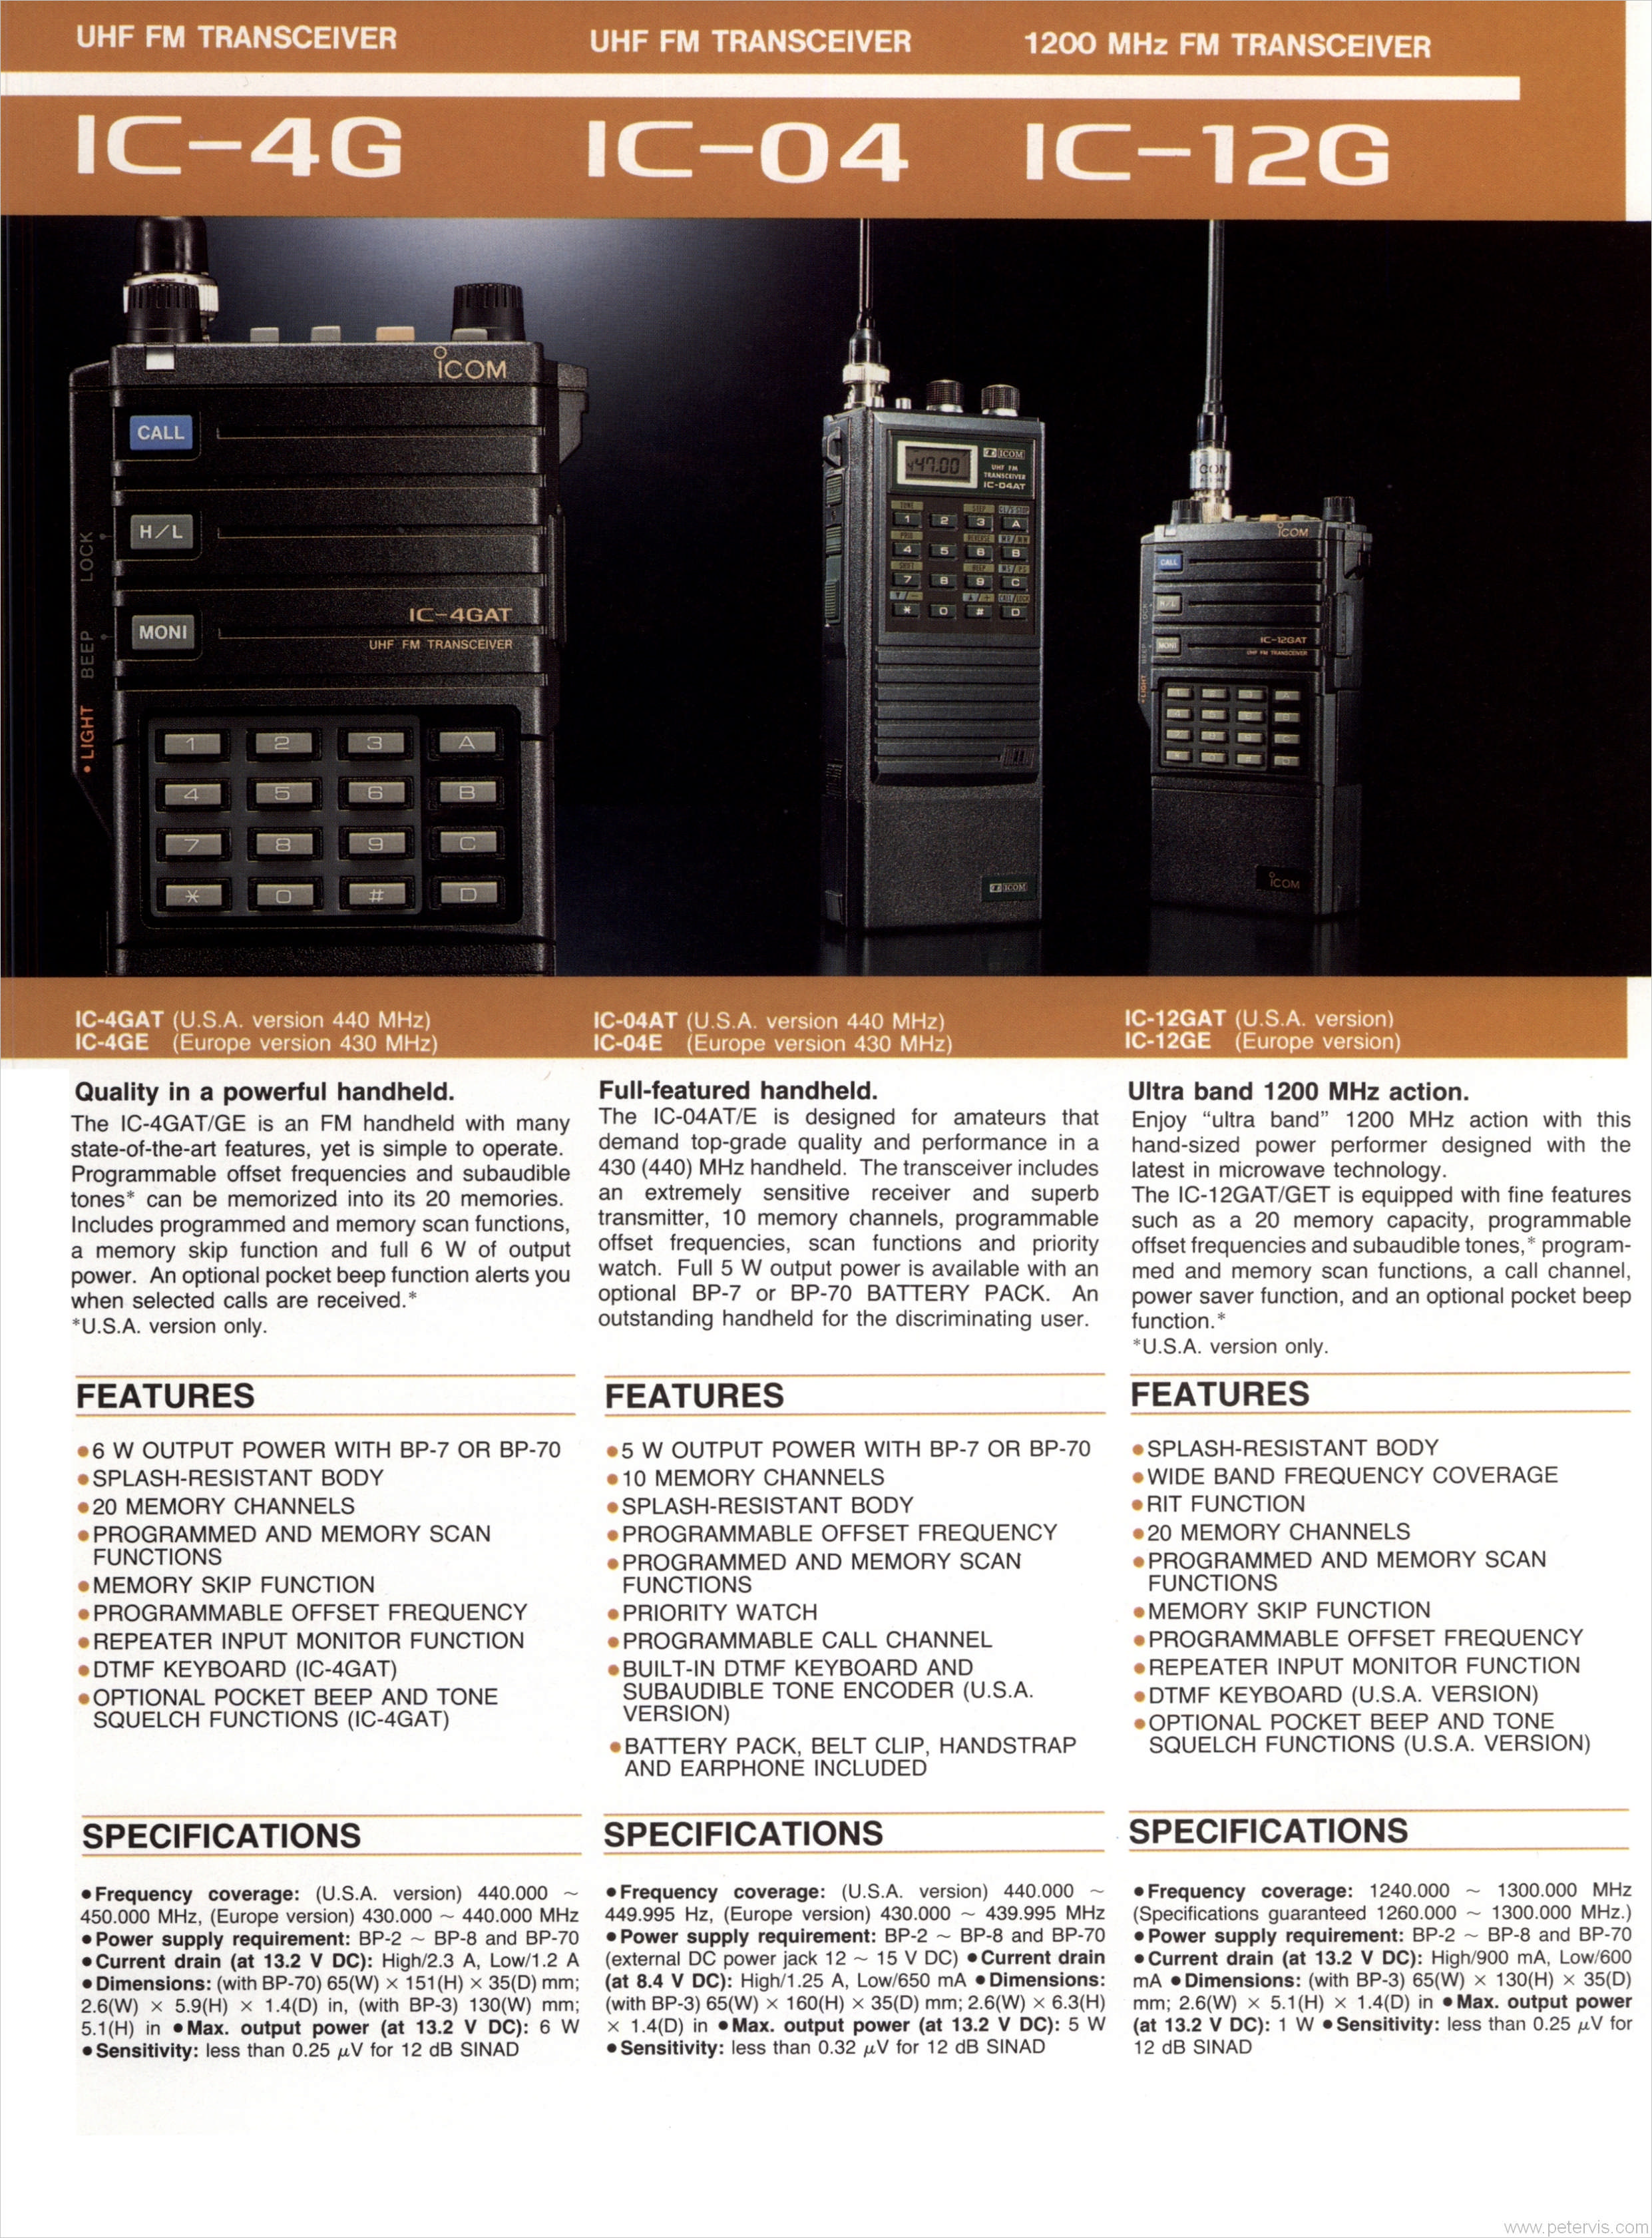 IC-4G and IC-04 and IC-12G SPECIFICATION and FEATURES